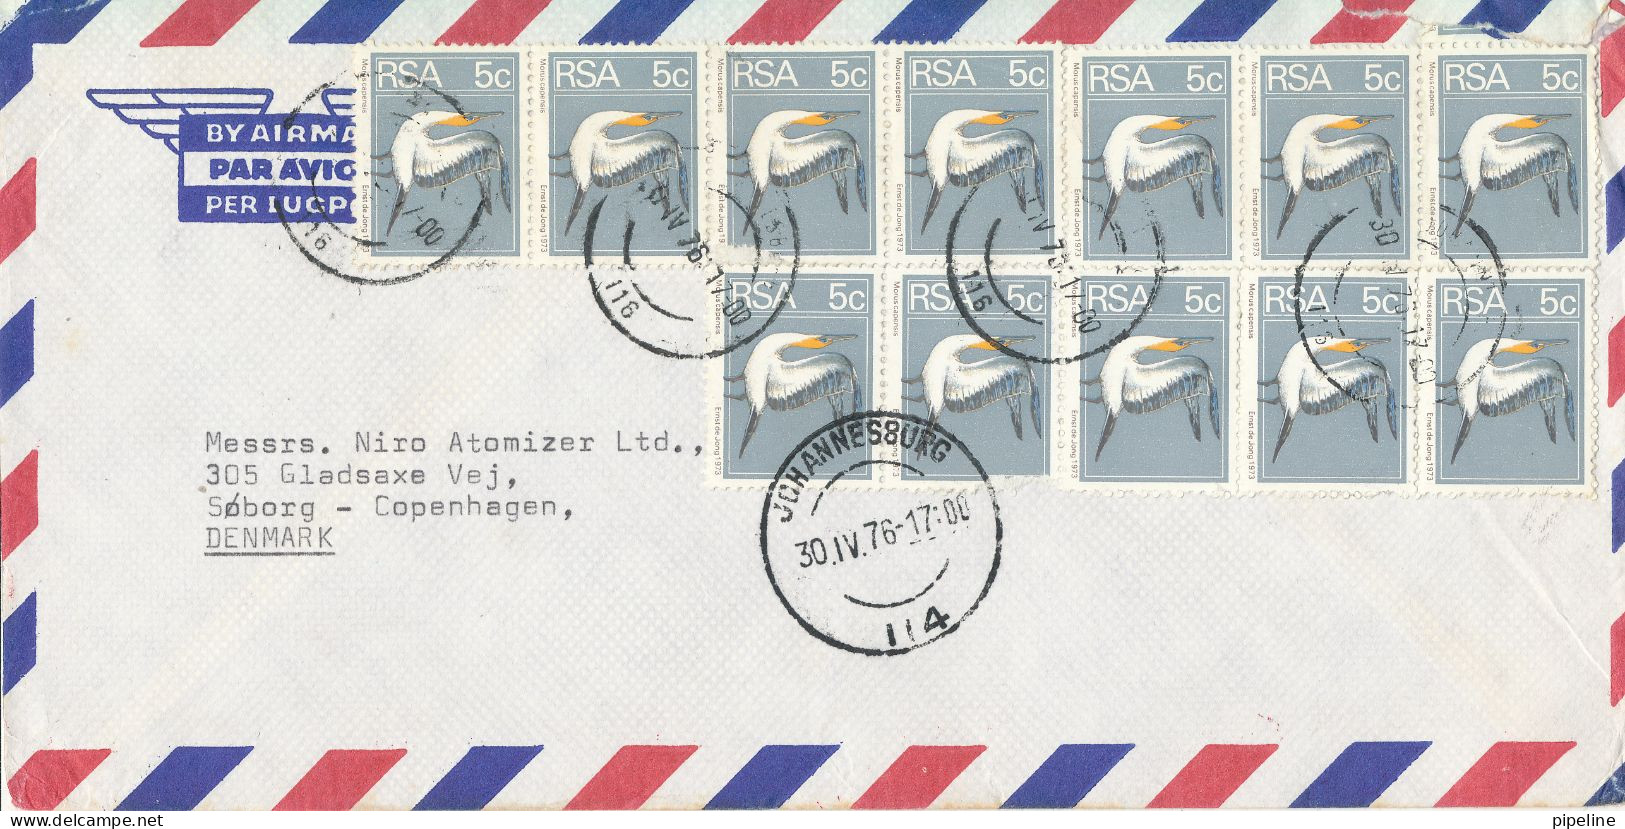 South Africa RSA Air Mail Cover Sent To Denmark 30-4-1976 With A Lot Of BIRD Stamps - Luchtpost